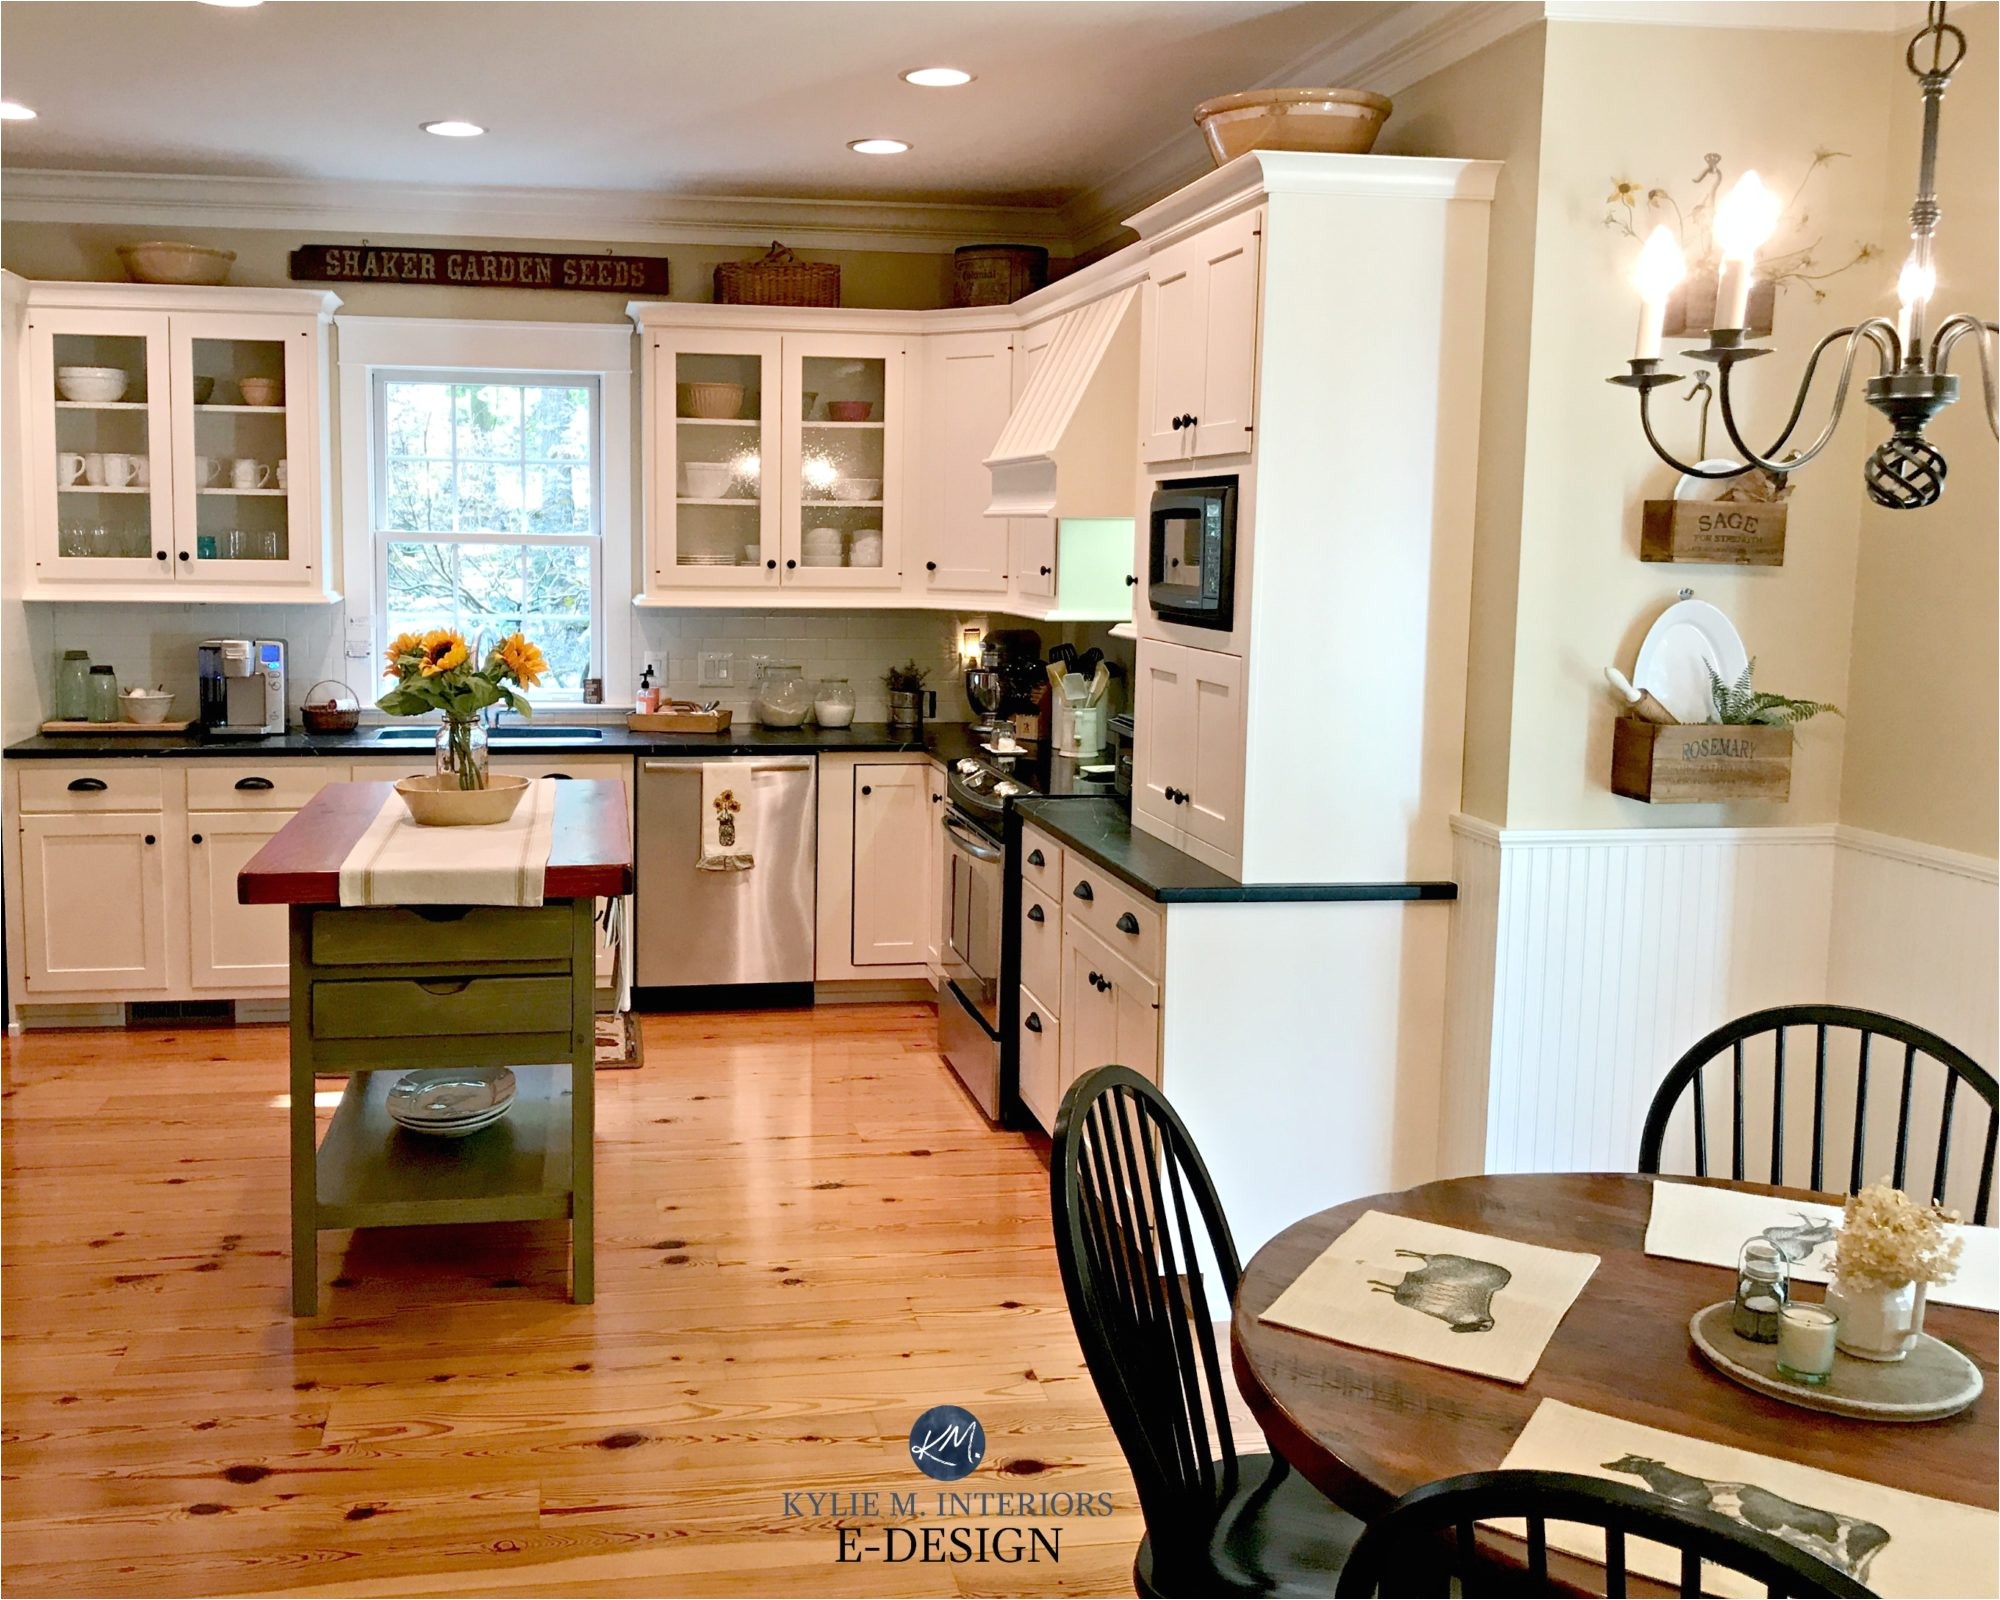 benjamin moore powell buff in white country farmhouse kitchen with pine wood flooring kylie m e design